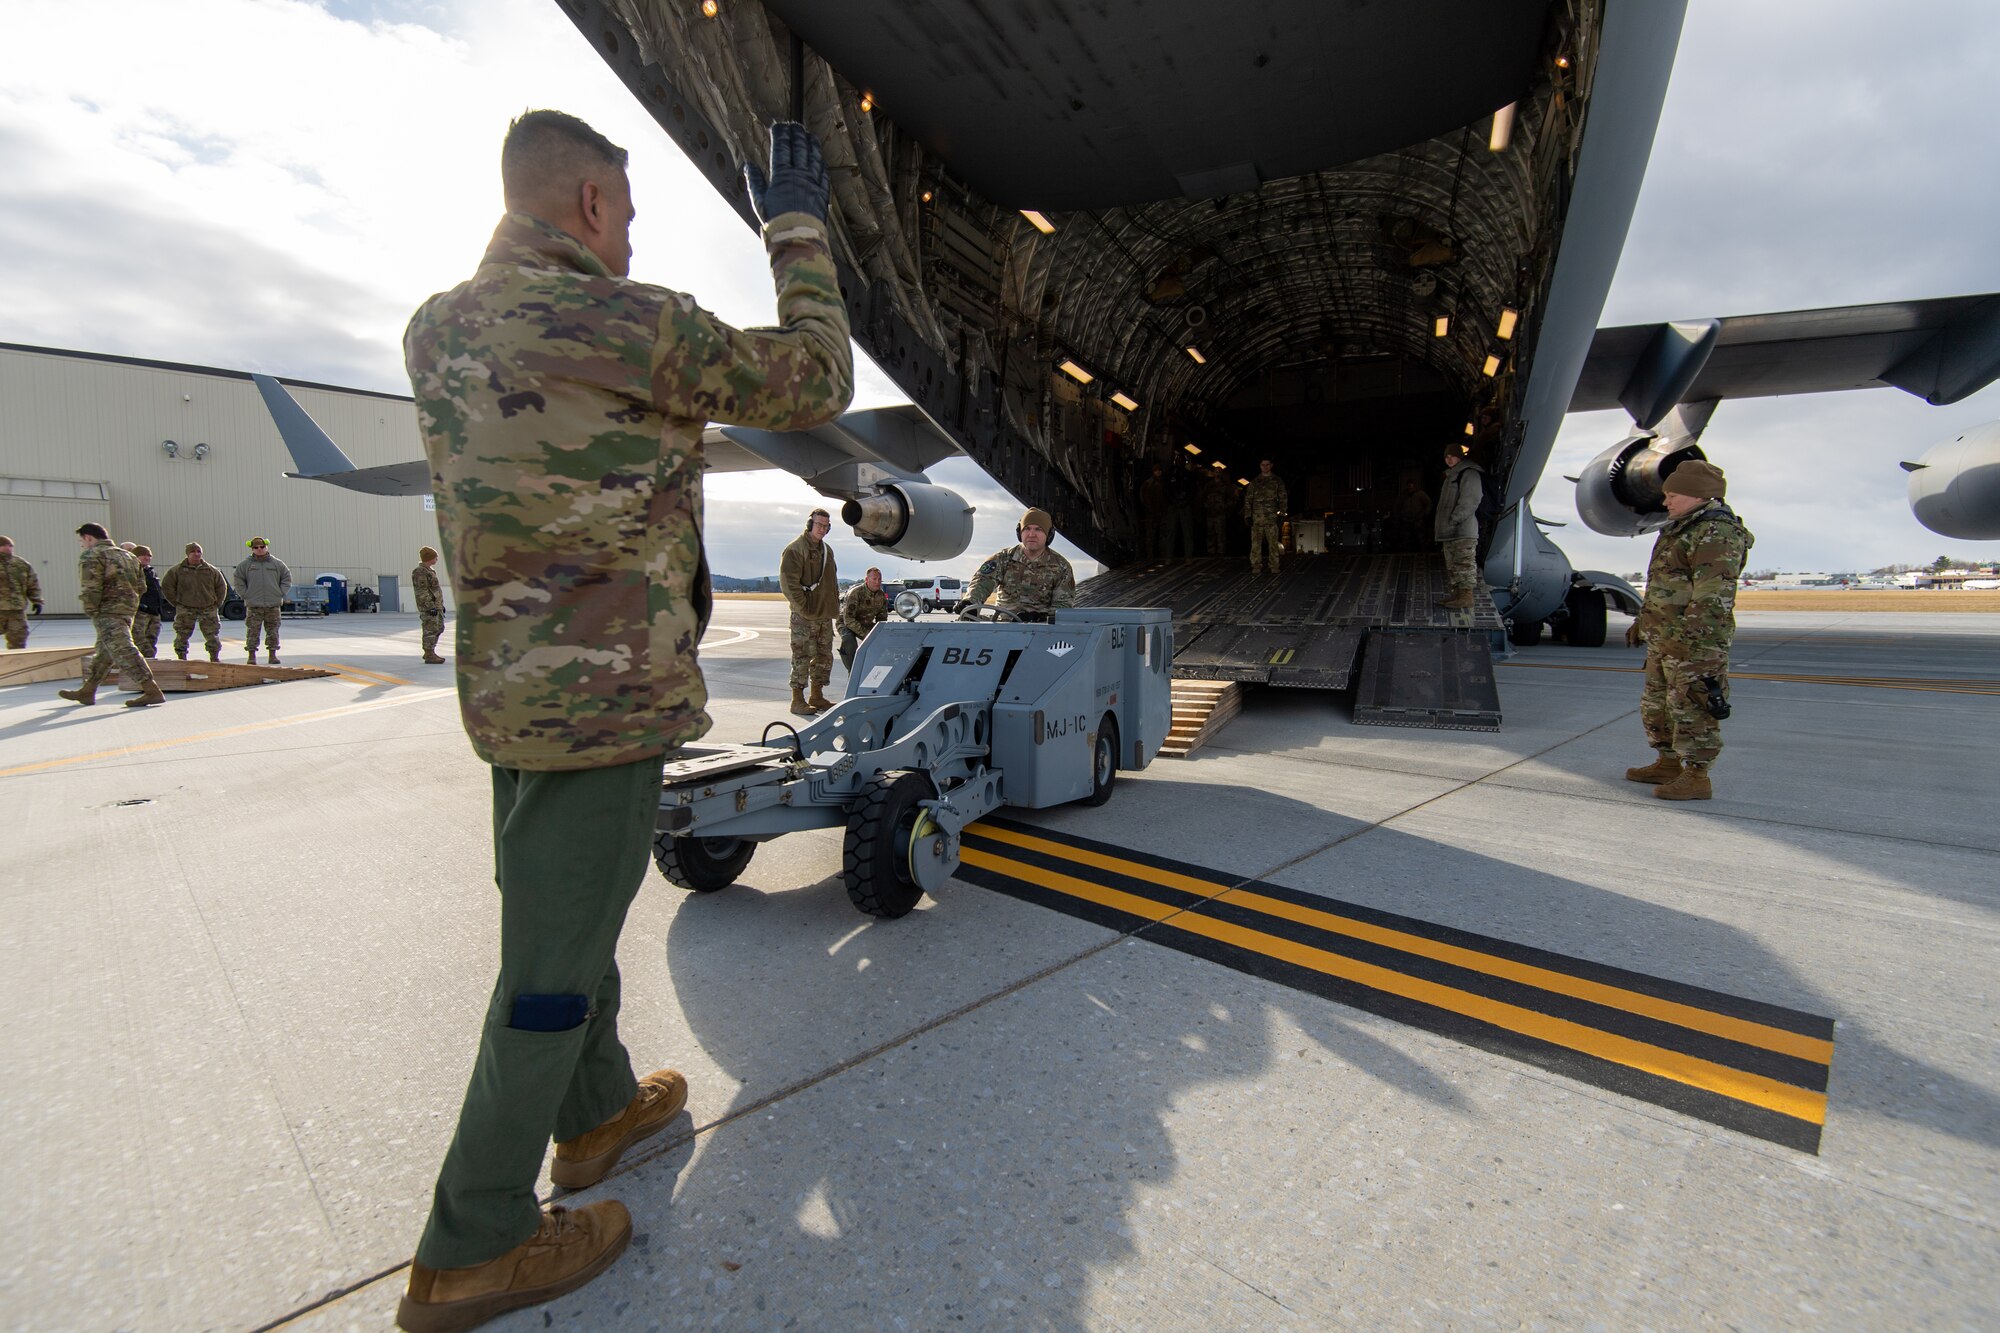 Airmen from the Vermont Air National Guard's 158th Aircraft Maintenance Squadron, along with Airmen from the New York ANG's 105th Airlift Wing, Stewart Air National Guard Base in Newburgh, New York, position wooden ramps to assist with loading equipment onto a C-17 Globemaster III aircraft at the Vermont Air National Guard Base, South Burlington, Vermont, Dec. 4, 2022. The multi-capable Airmen concept entails training Airmen in basic tasks outside of their usual specialty, so by having 158th Fighter Wing Airmen receiving exposure and training from the 105th, allows the Vermonters to be more versatile and contribute to the mission where needed. (U.S. Air National Guard photo by Senior Master Sgt. Michael Davis)